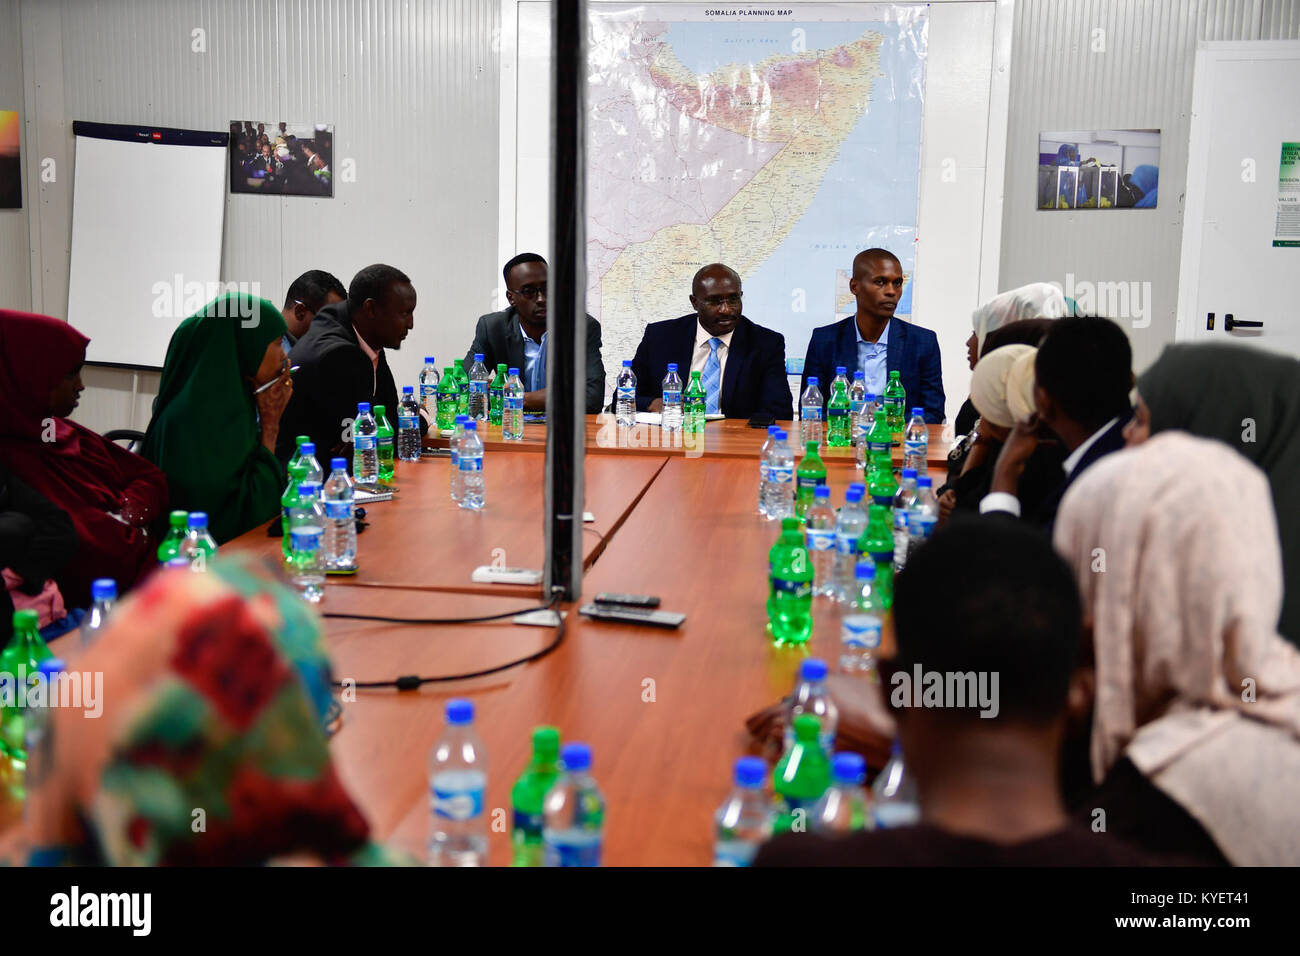 Simon Mulongo, the Deputy Special Representative of the Chairperson of the African Union Commission (DSRCC) for Somalia, meets with Somali youth leaders and activists at AMISOM Mission headquarters in Mogadishu on December 23, 2017. AMISOM Photo / Ilyas Ahmed Stock Photo